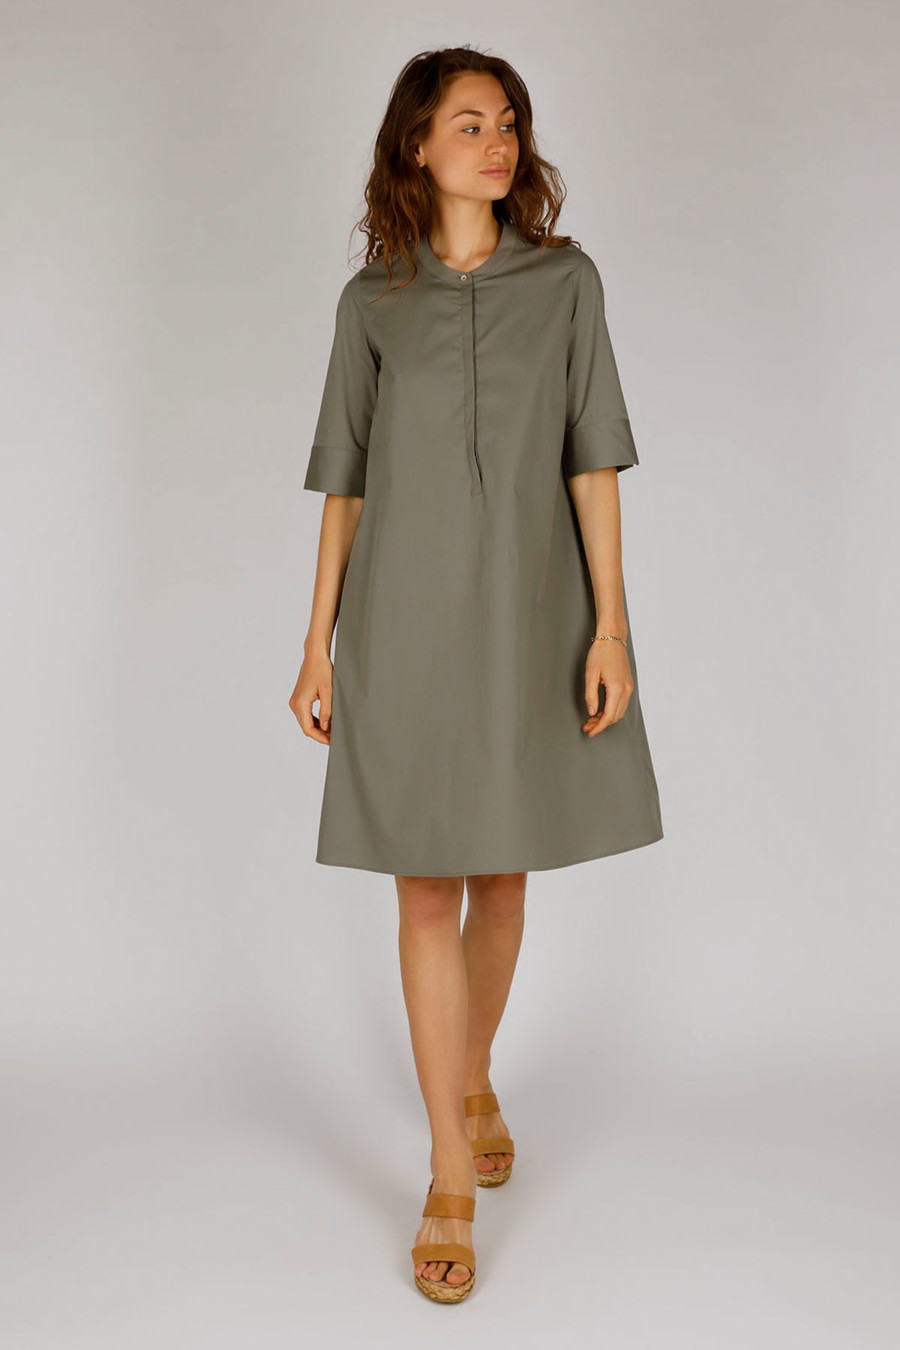 PHOEBE - Shirt blouse dress with extended half sleeve - Colour: Vetiver